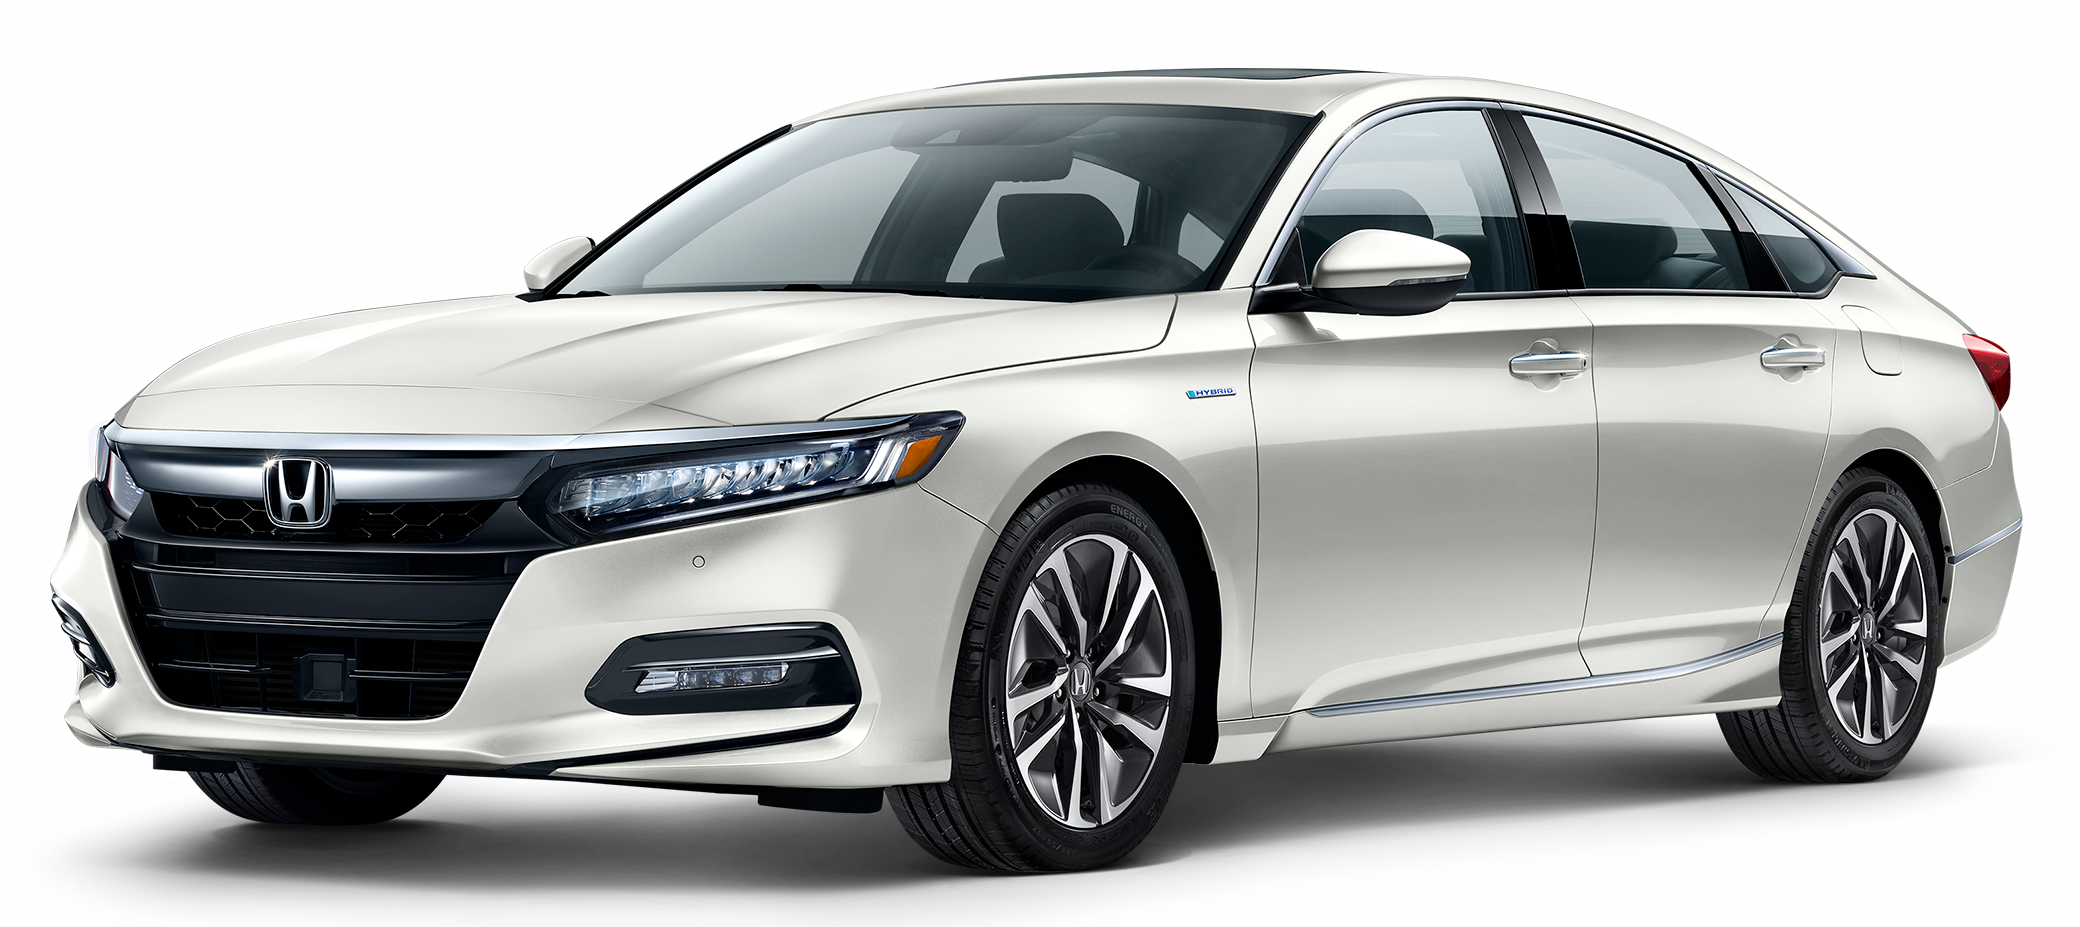 2020 Honda Accord Hybrid Incentives, Specials & Offers in Lockport NY